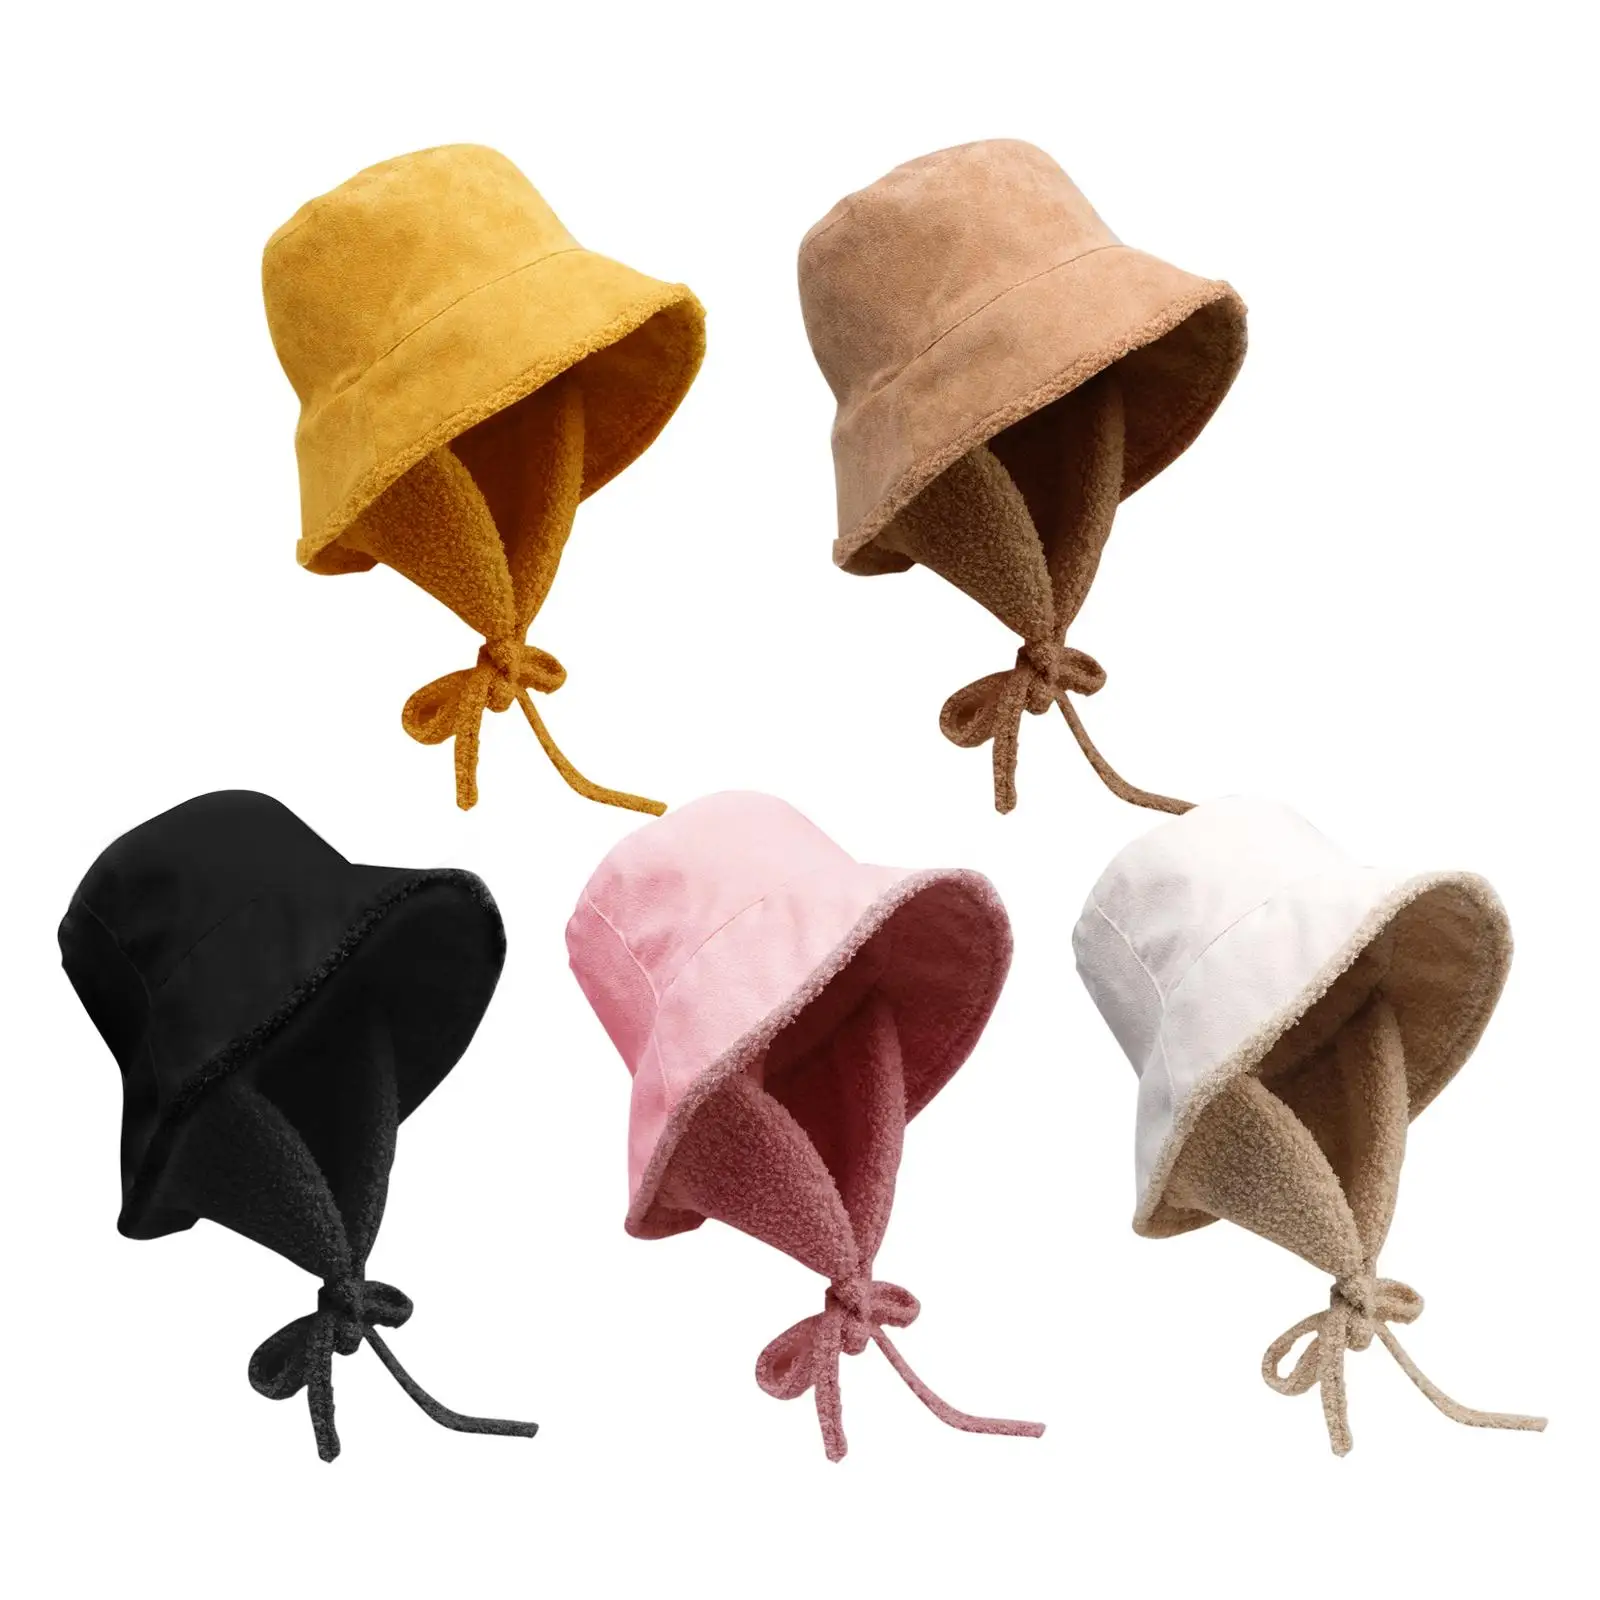 Warm Winter Hat Size Soft with Ear Protection Fisherman Hat Cute Bucket Hat for Women, Men, Adults, Picnic, Travel, Outdoor